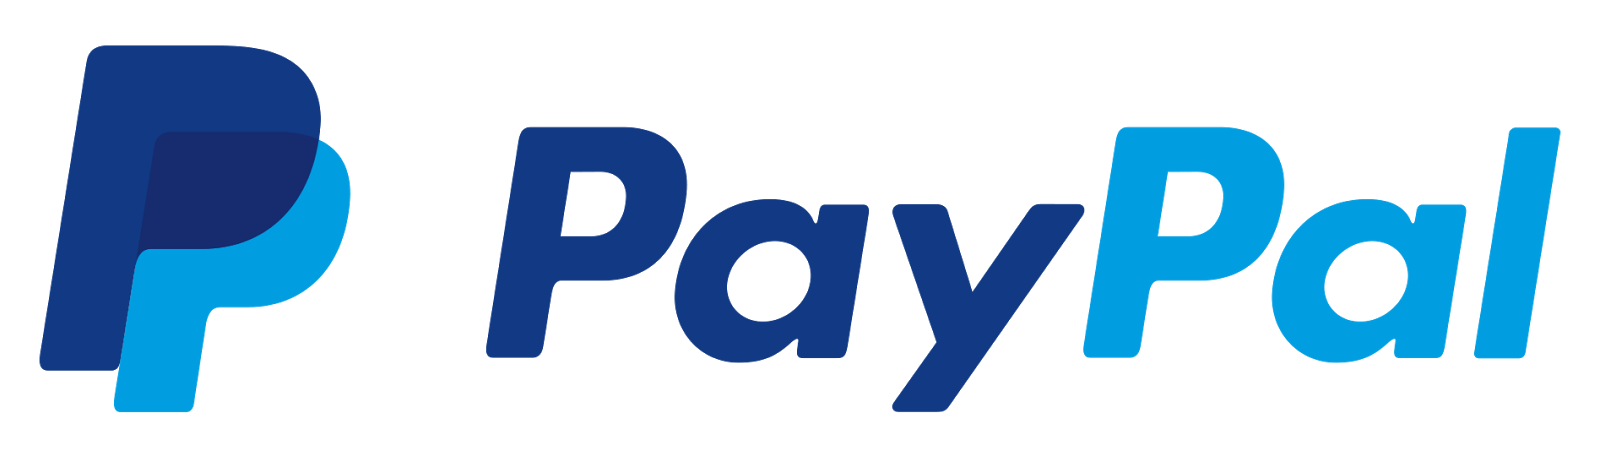 Paypal Clipart blue